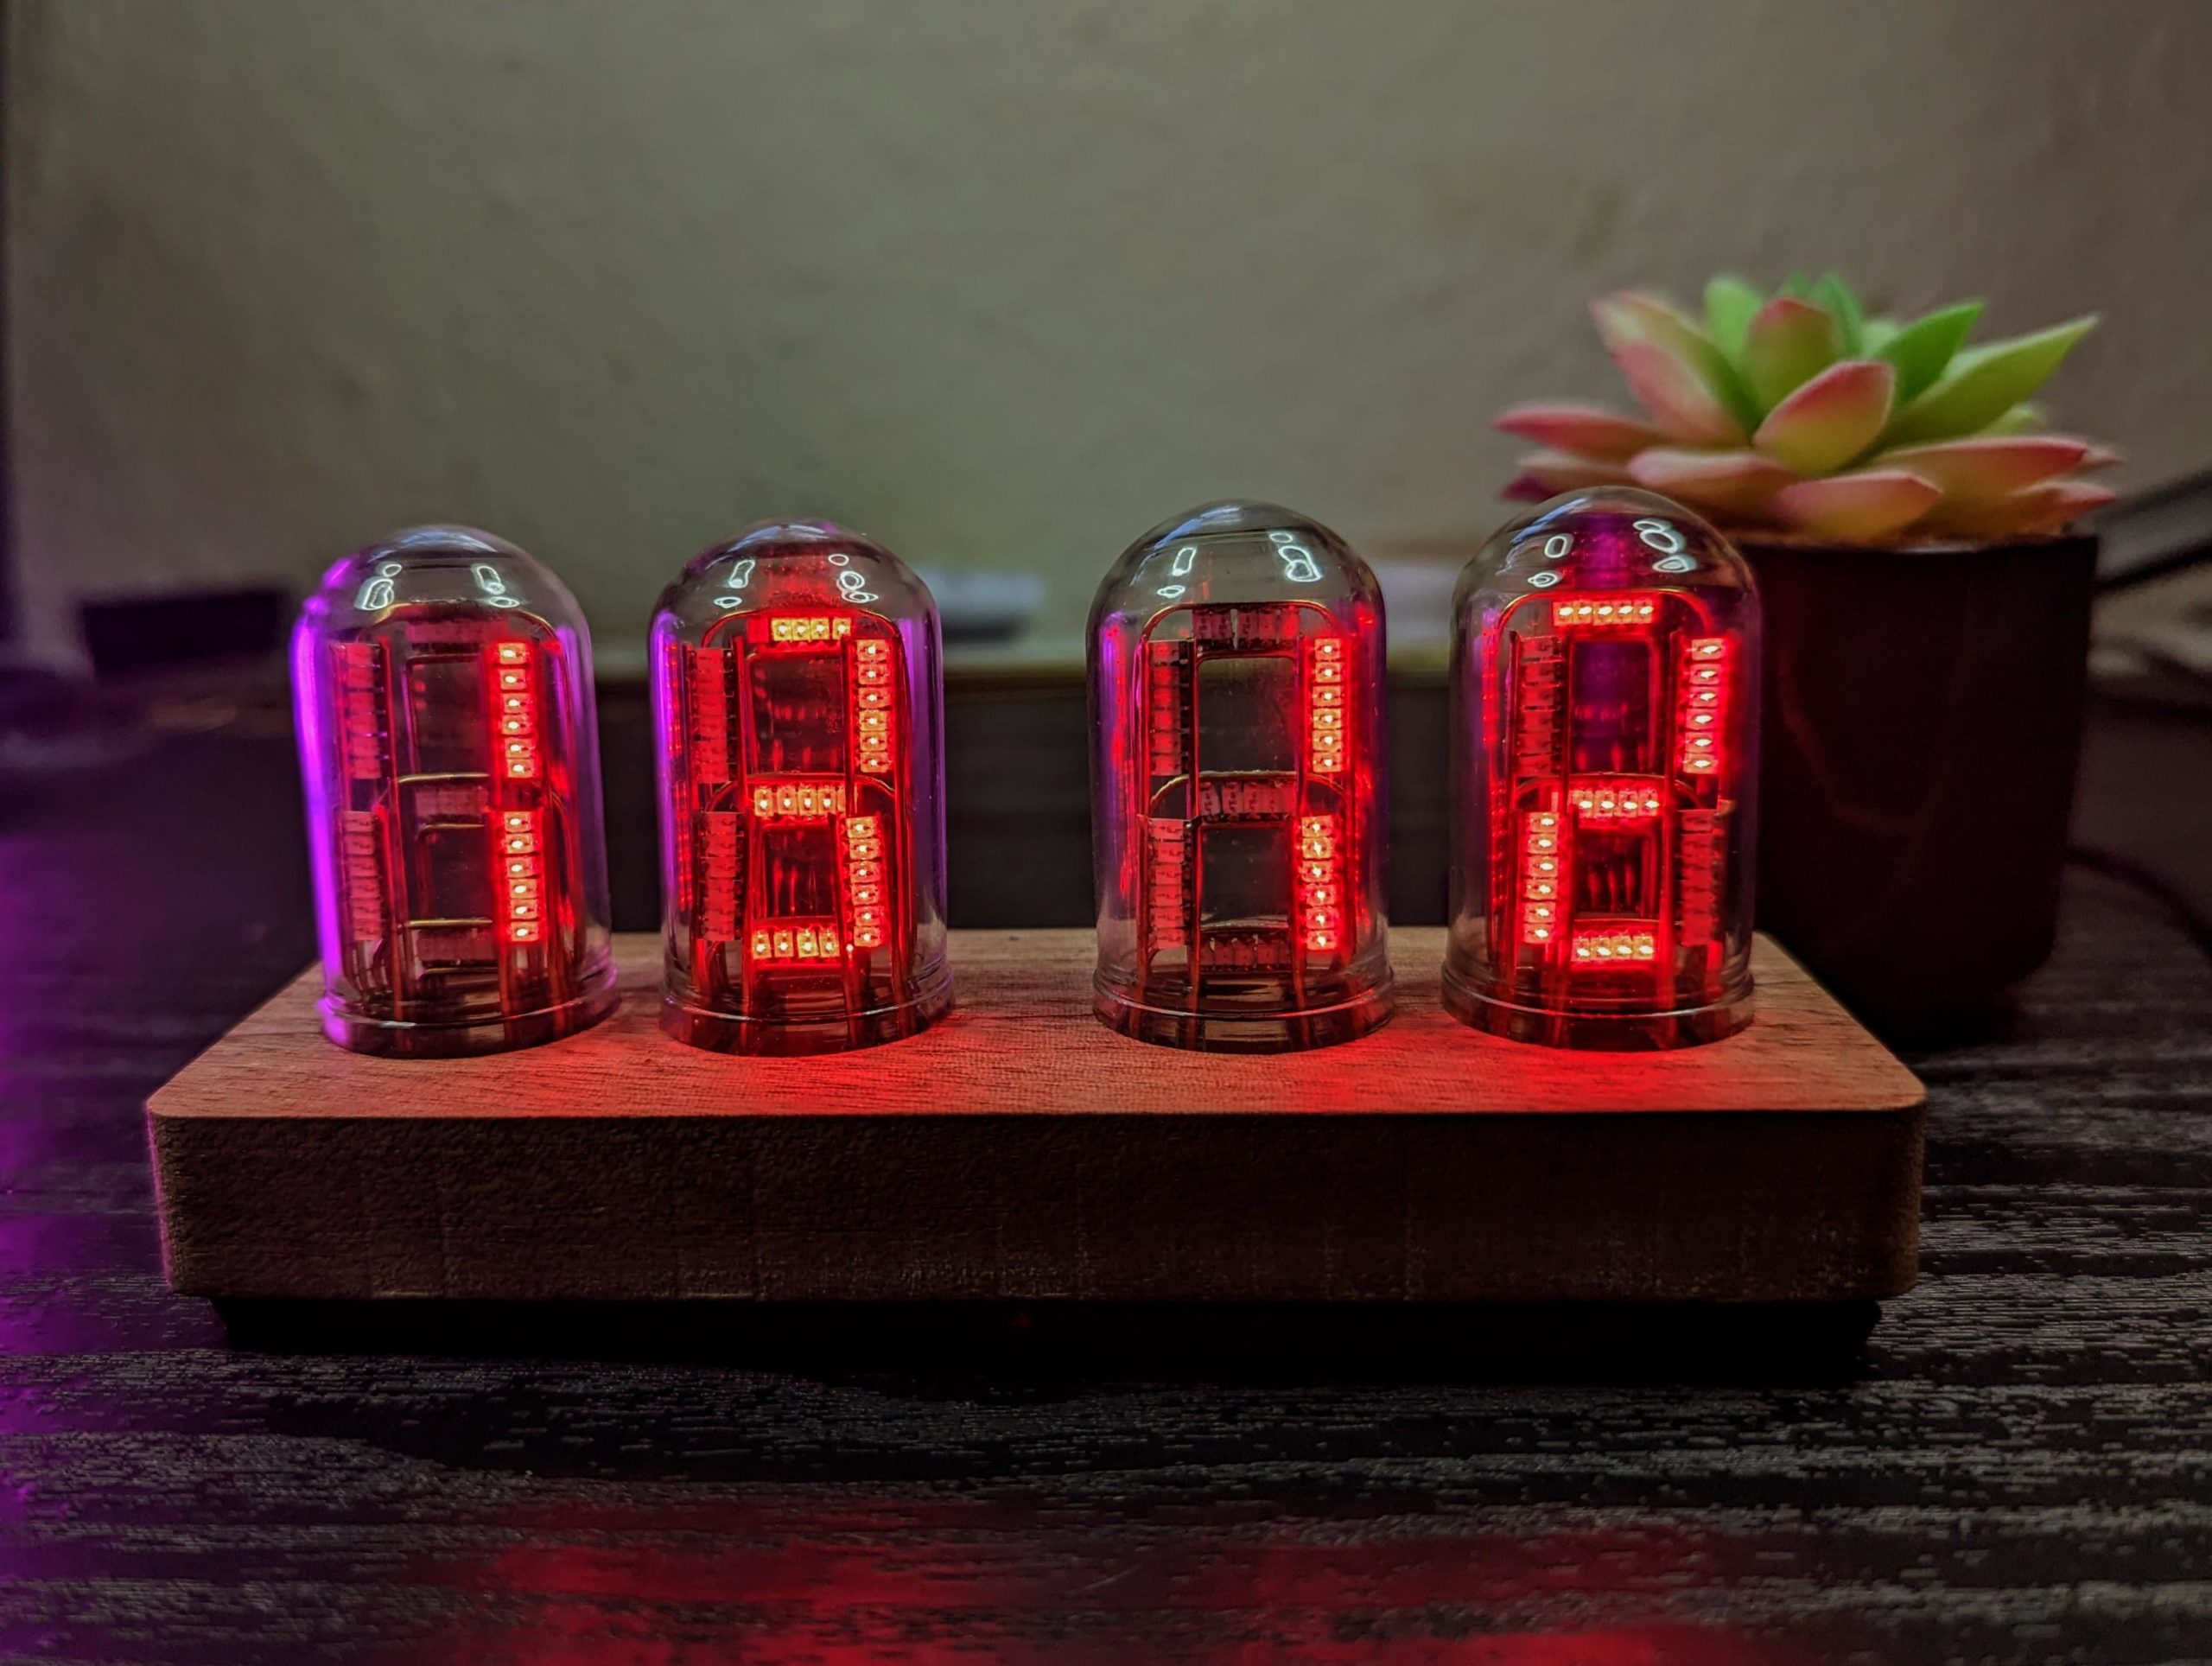 This beautiful clock features circuit sculpture faux Nixie tubes